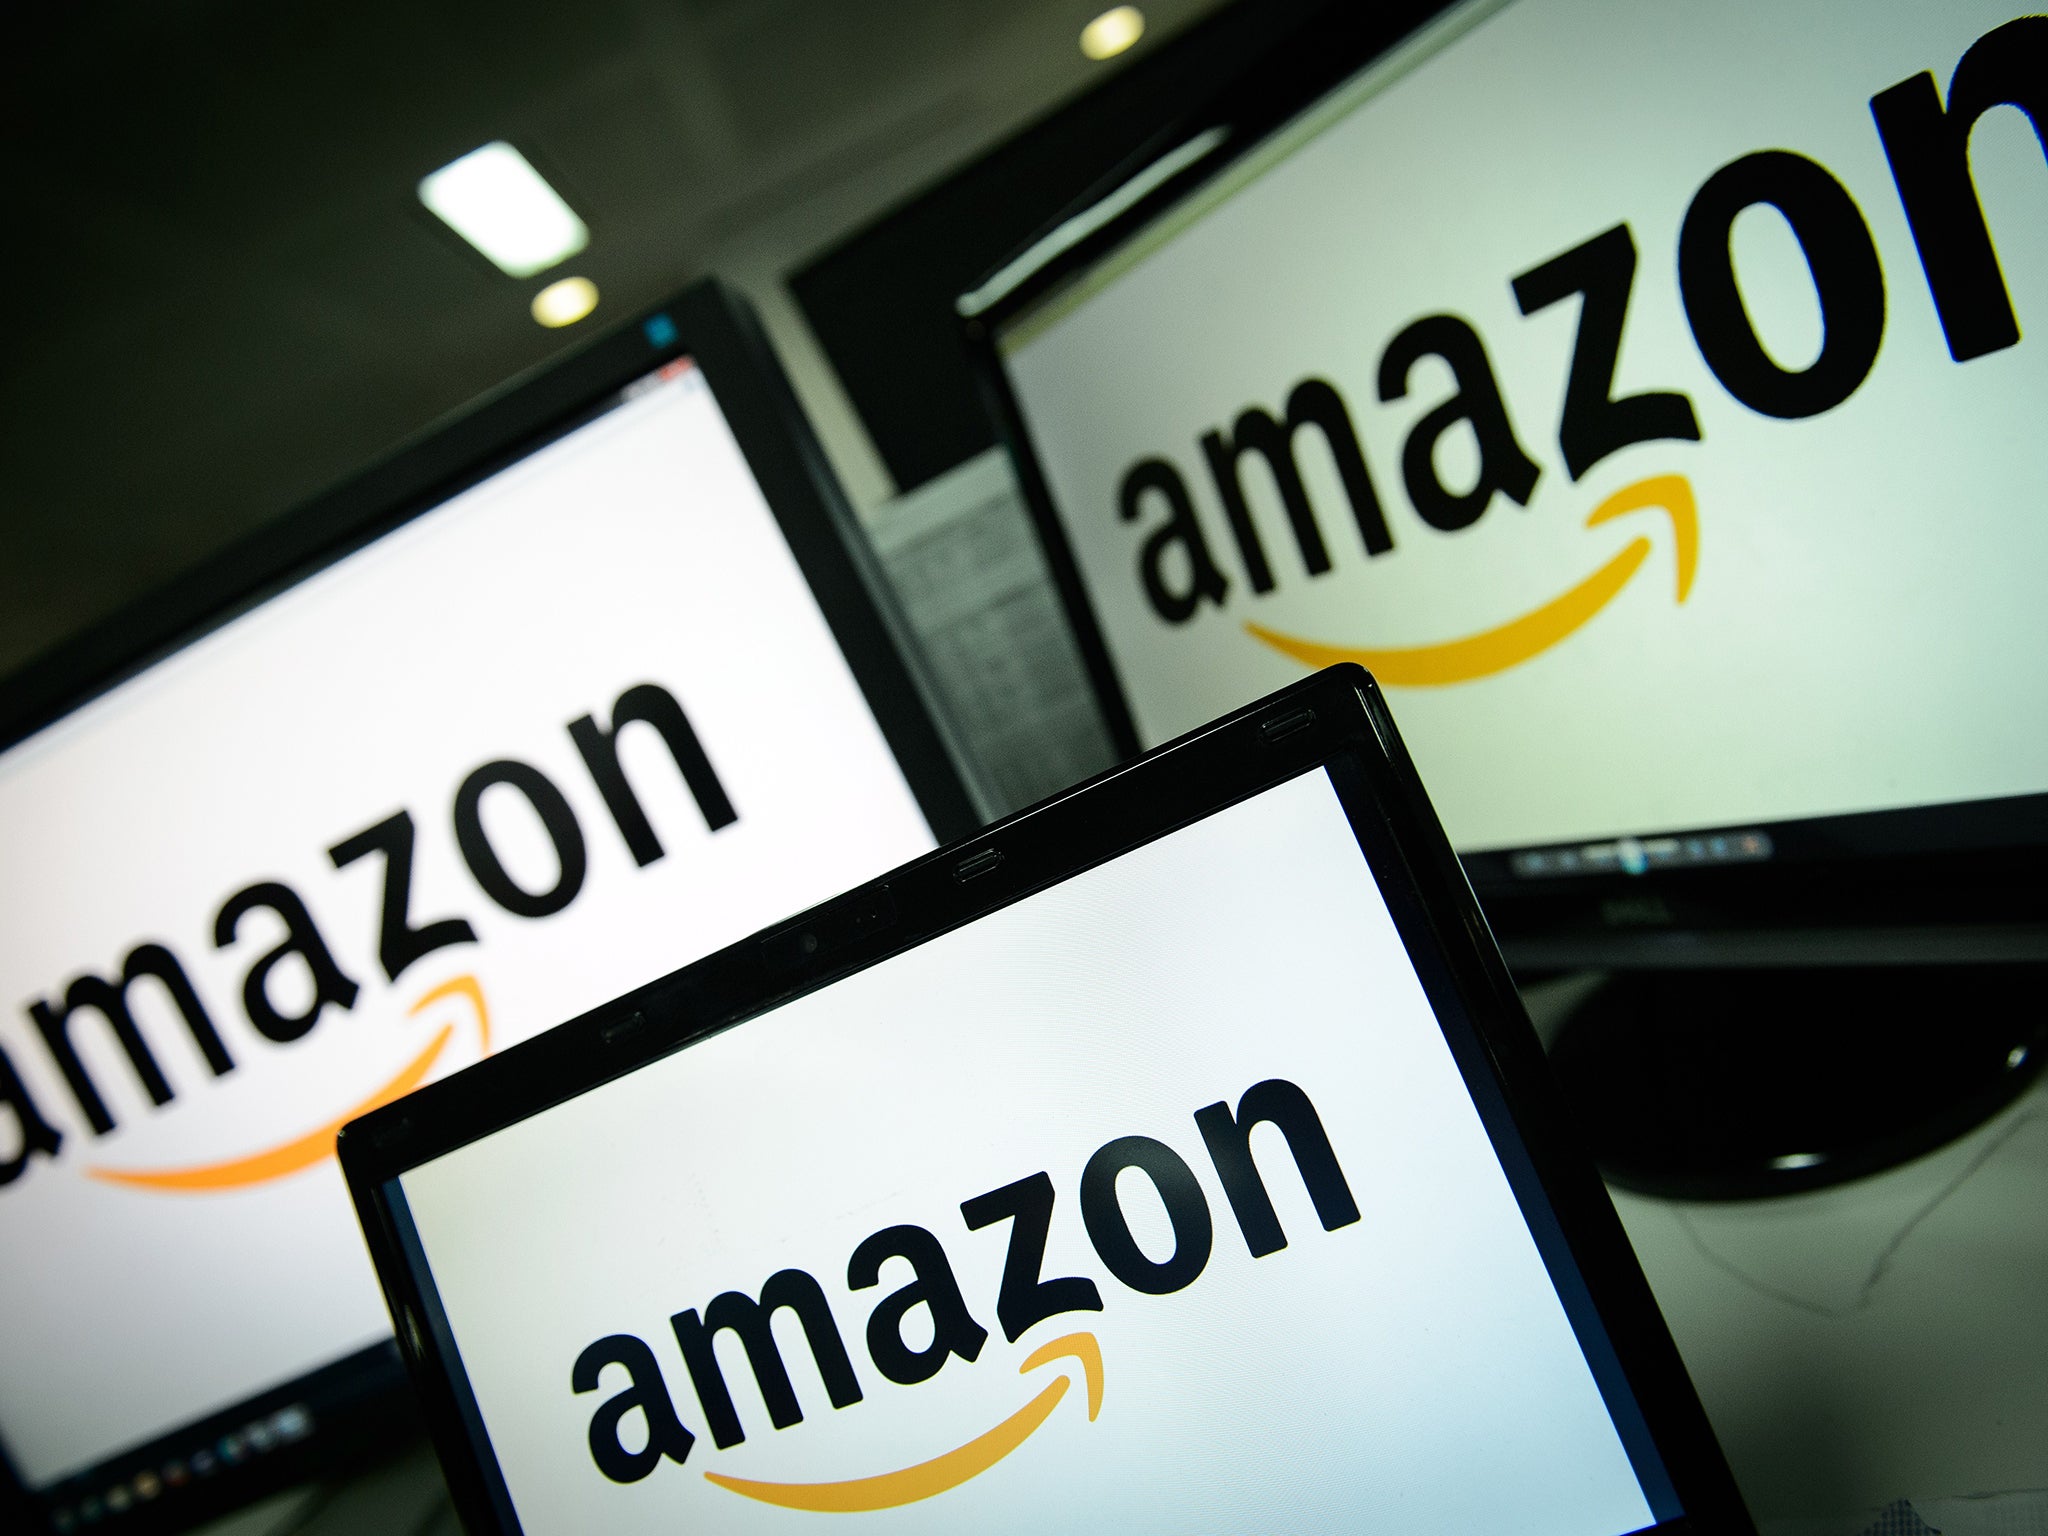 Manchester will be one of two new Amazon fulfilment centres to open in the UK in 2016